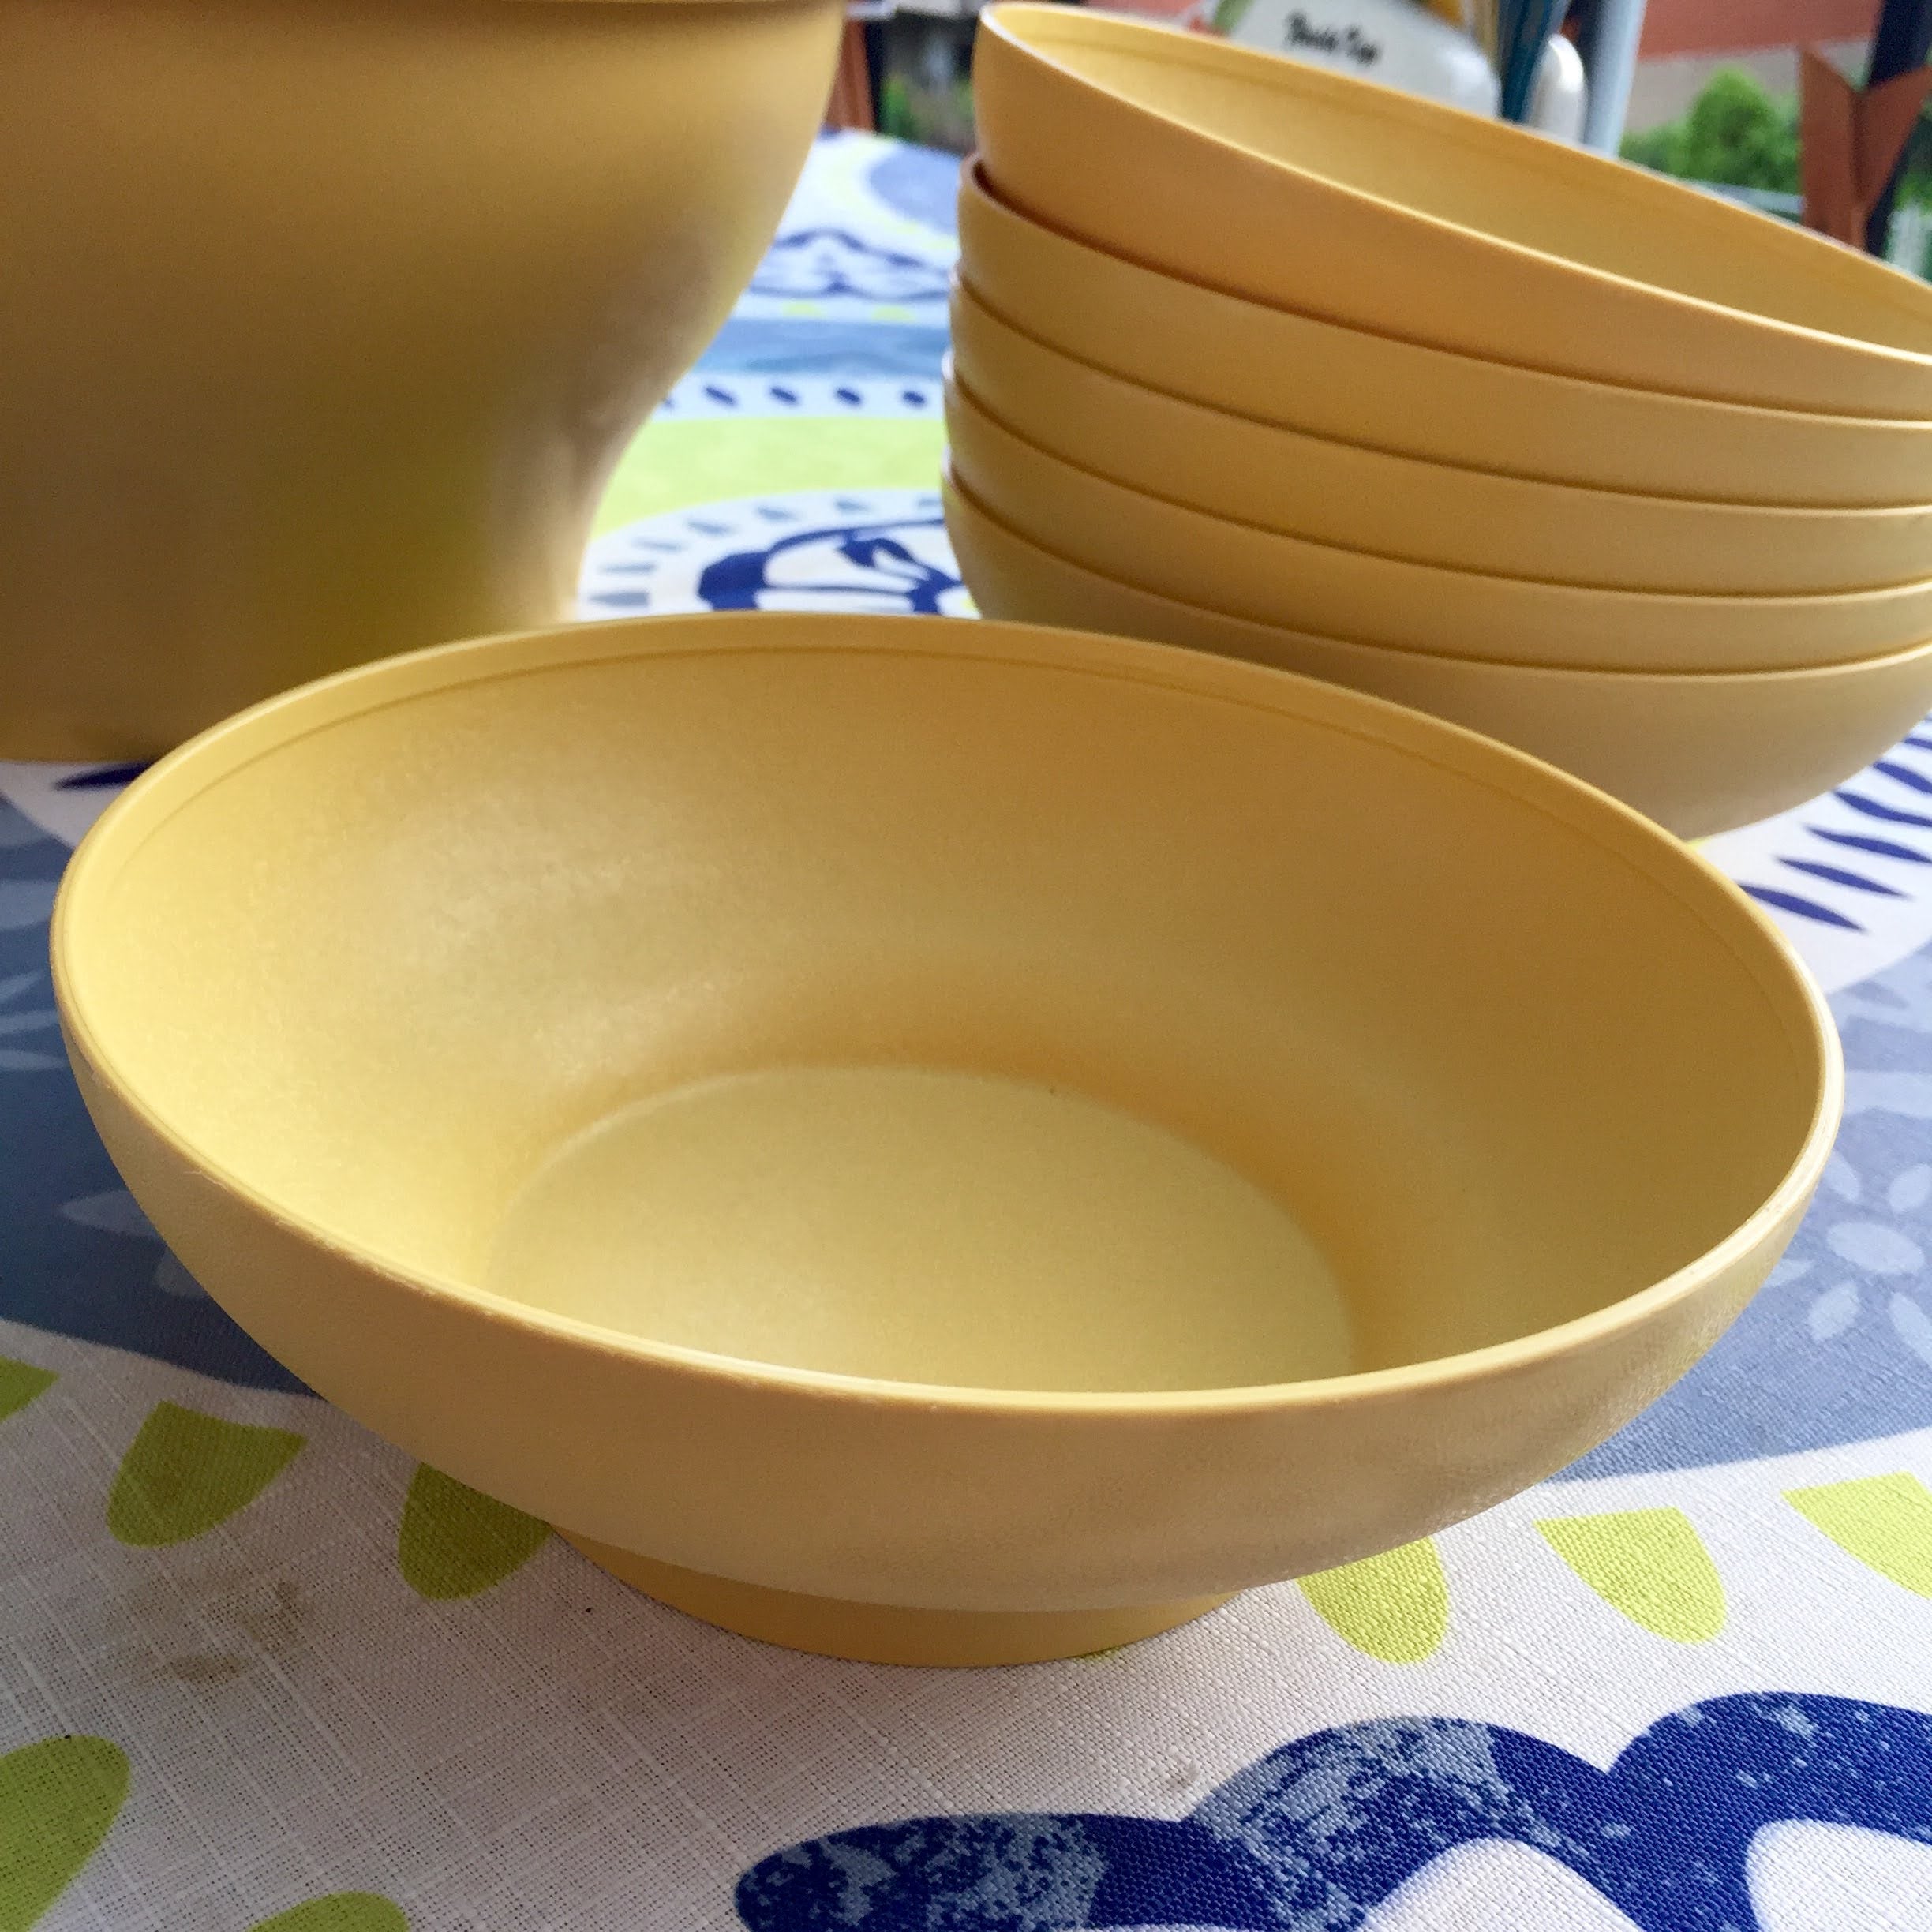 Vintage Tupperware Salad Serving Bowl With Forks and 6 Small Salad